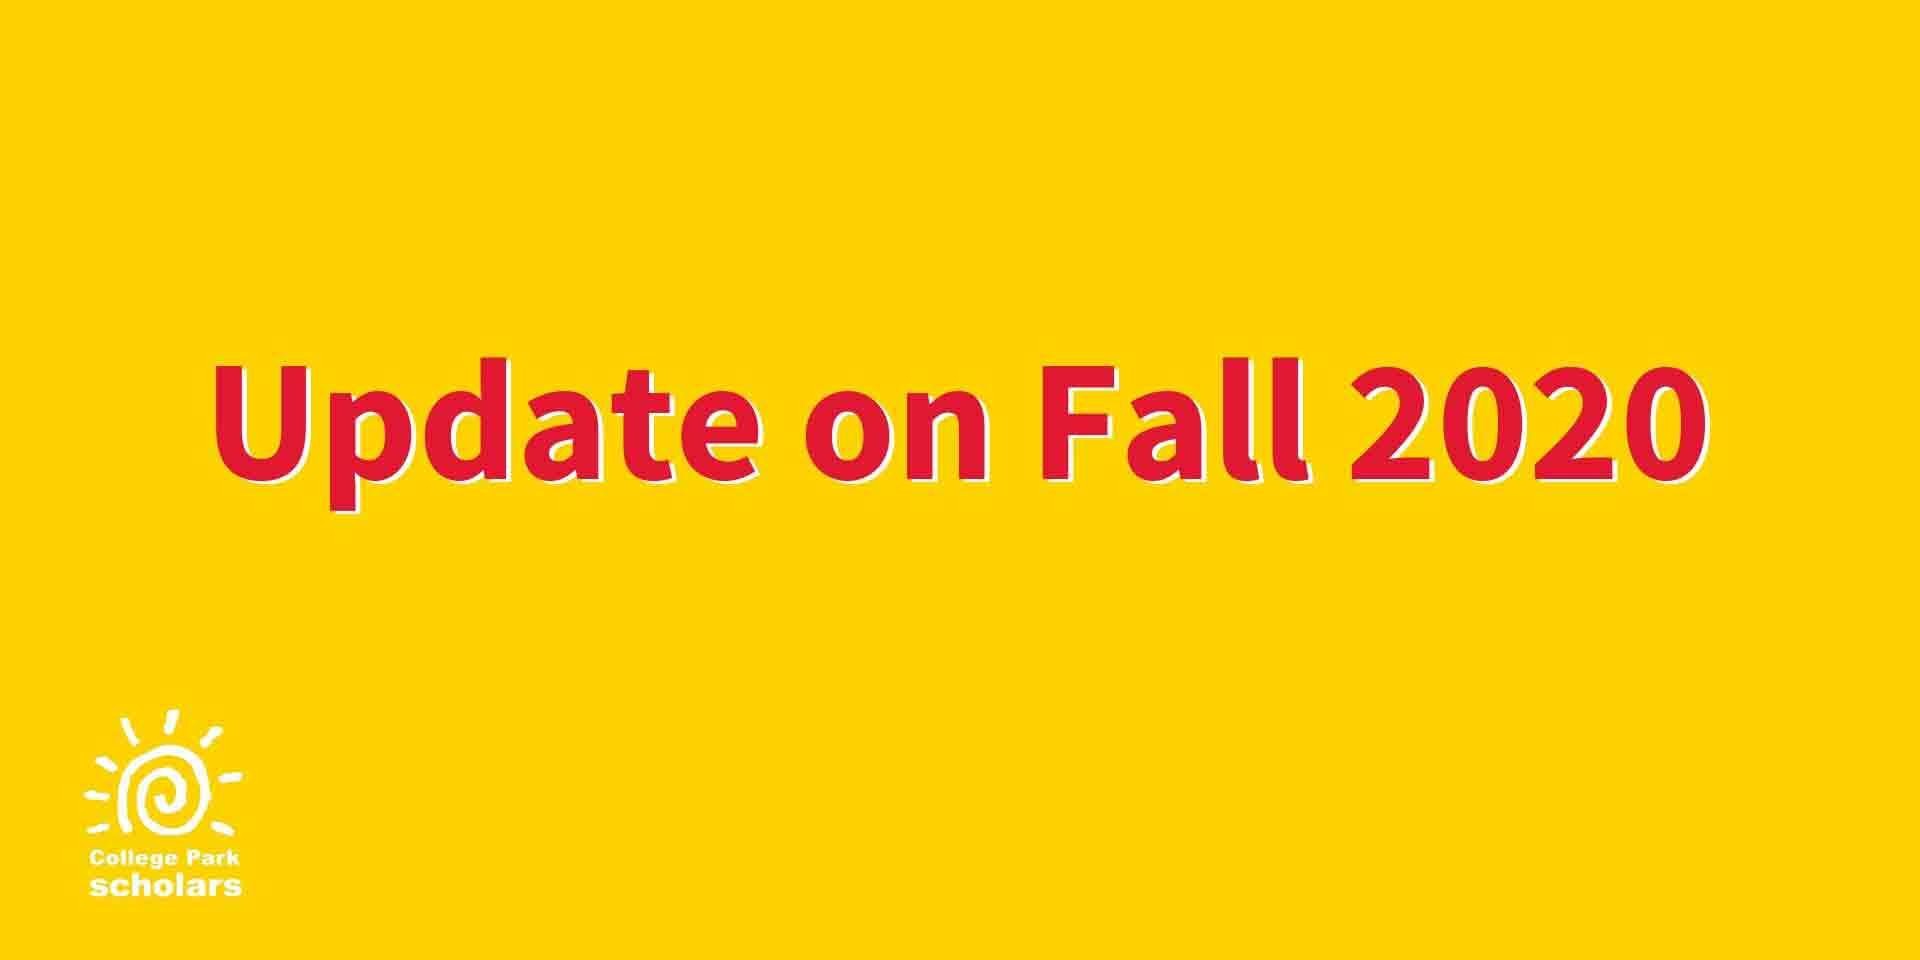 Update on Fall 2020